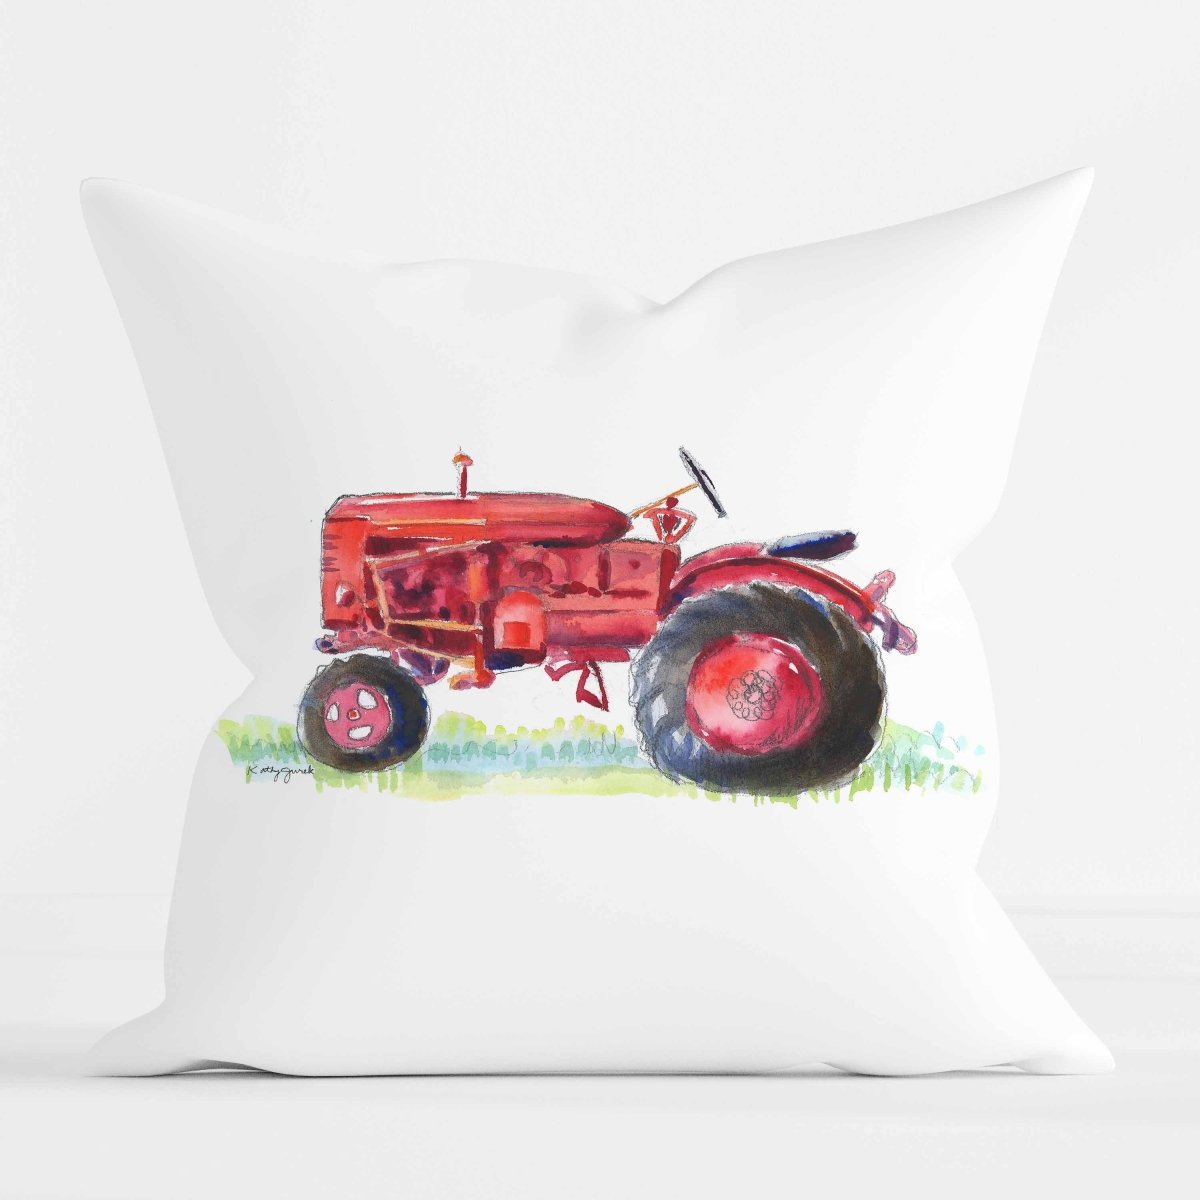 Red Tractor Pillow Cover